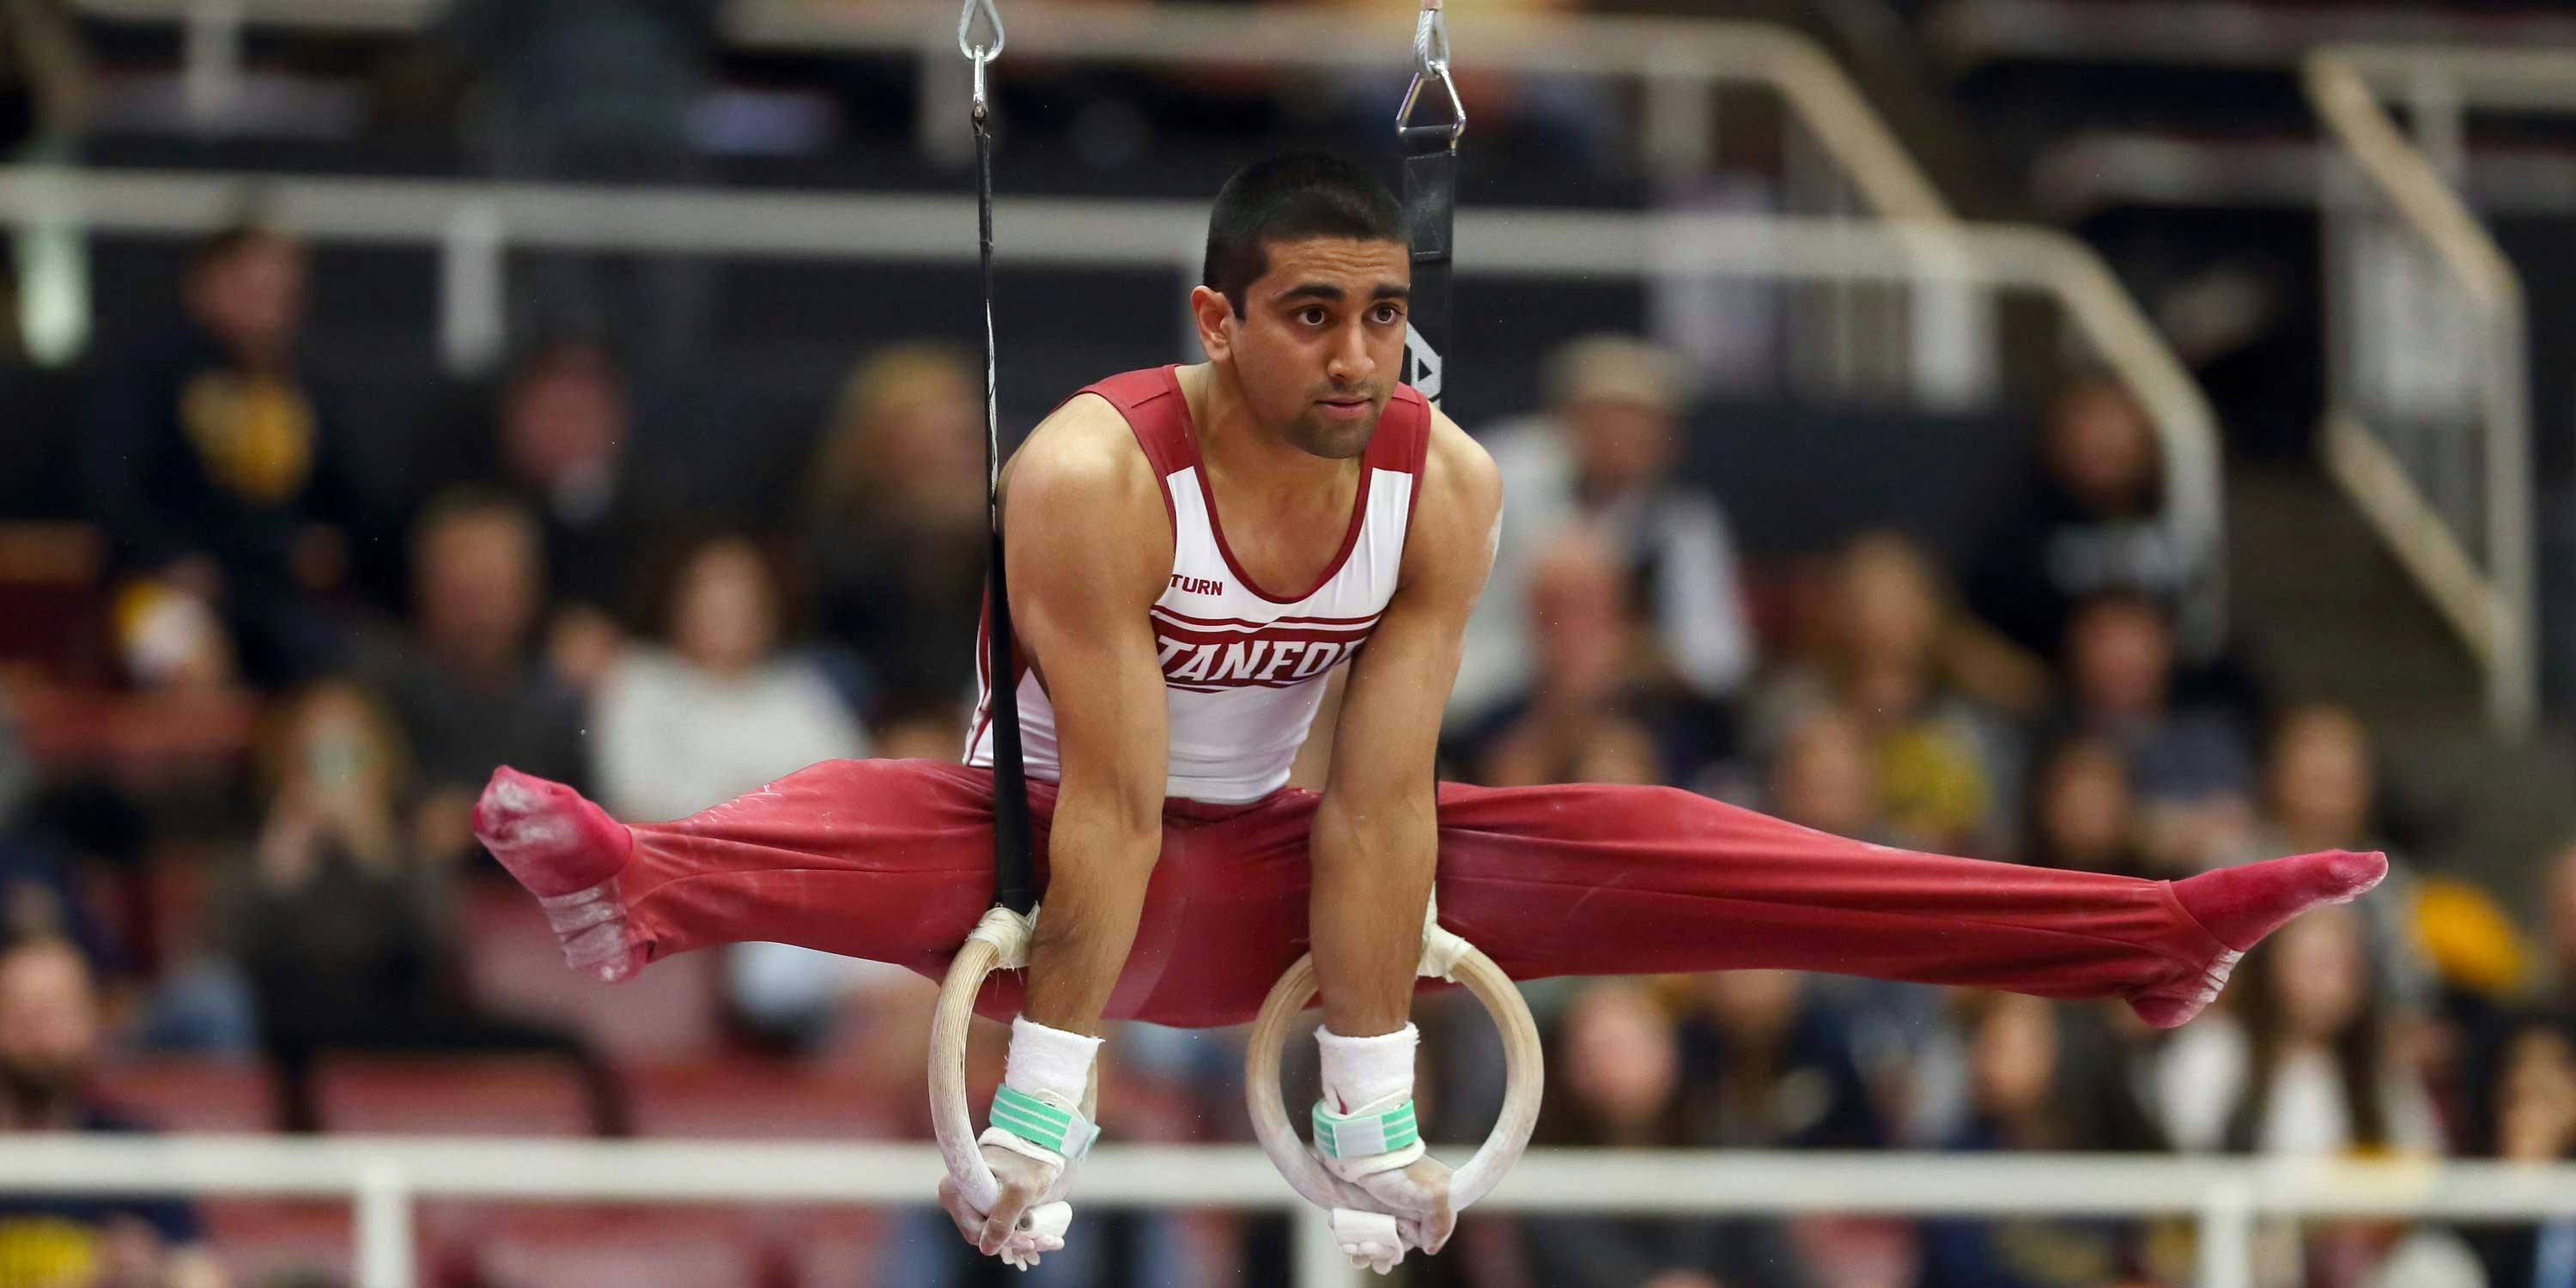 Stanford gymnast Akash Modi competing in March 2014. (Hector Garcia-Molina/ISIPhotos)